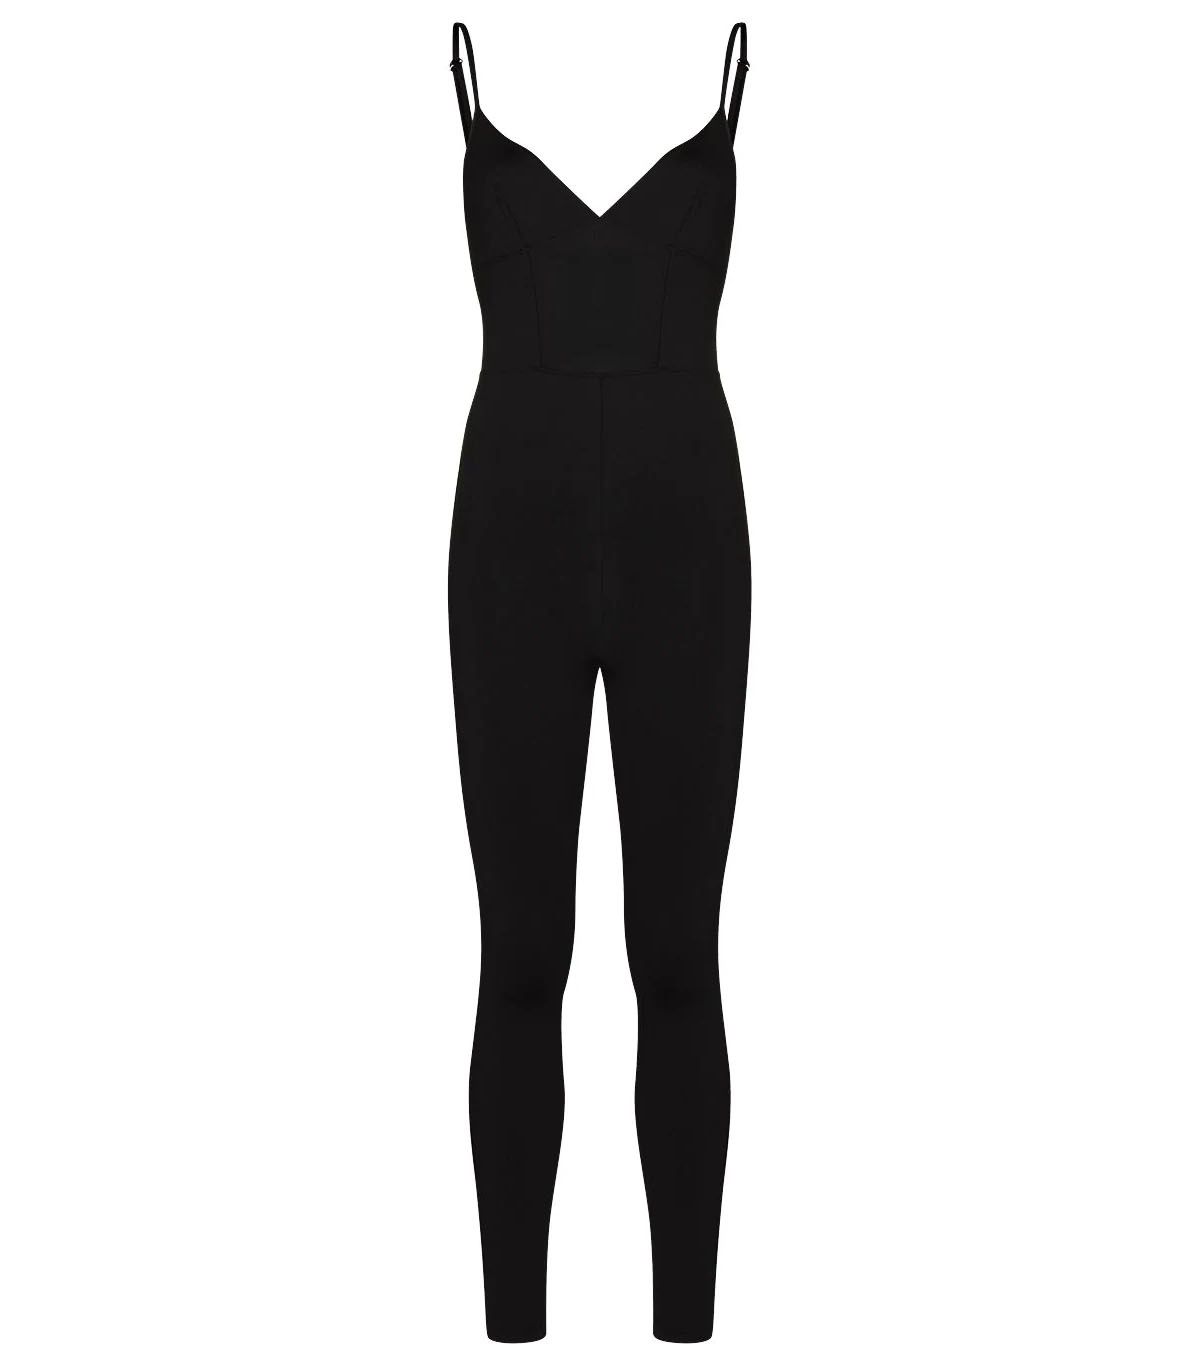 Yoga Unitards Are the Surprising New Anti-Legging Trend | Who What Wear